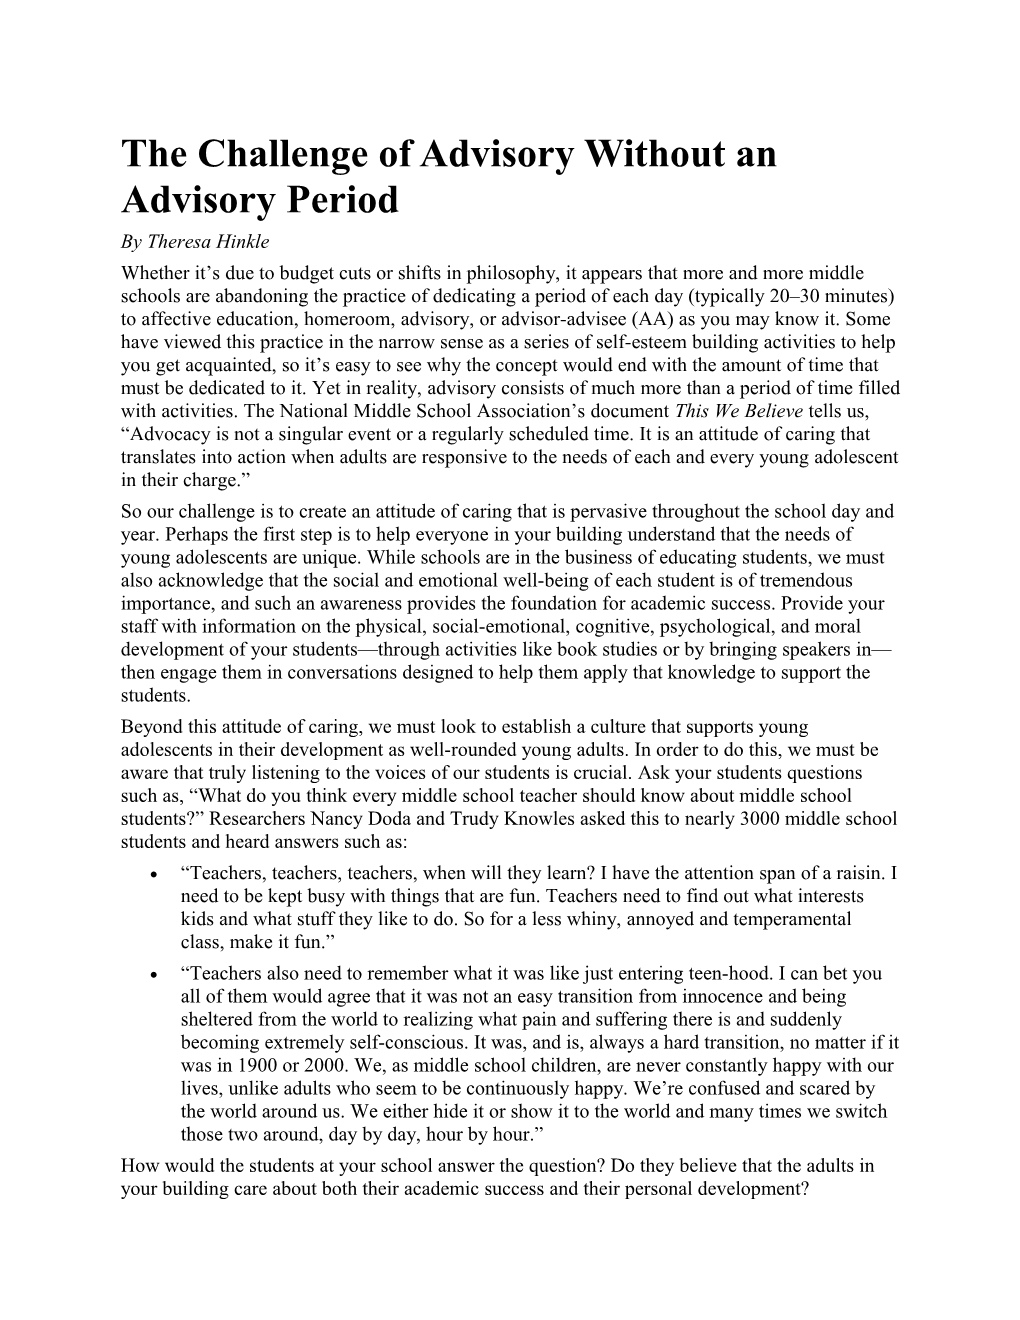 The Challenge of Advisory Without an Advisory Period